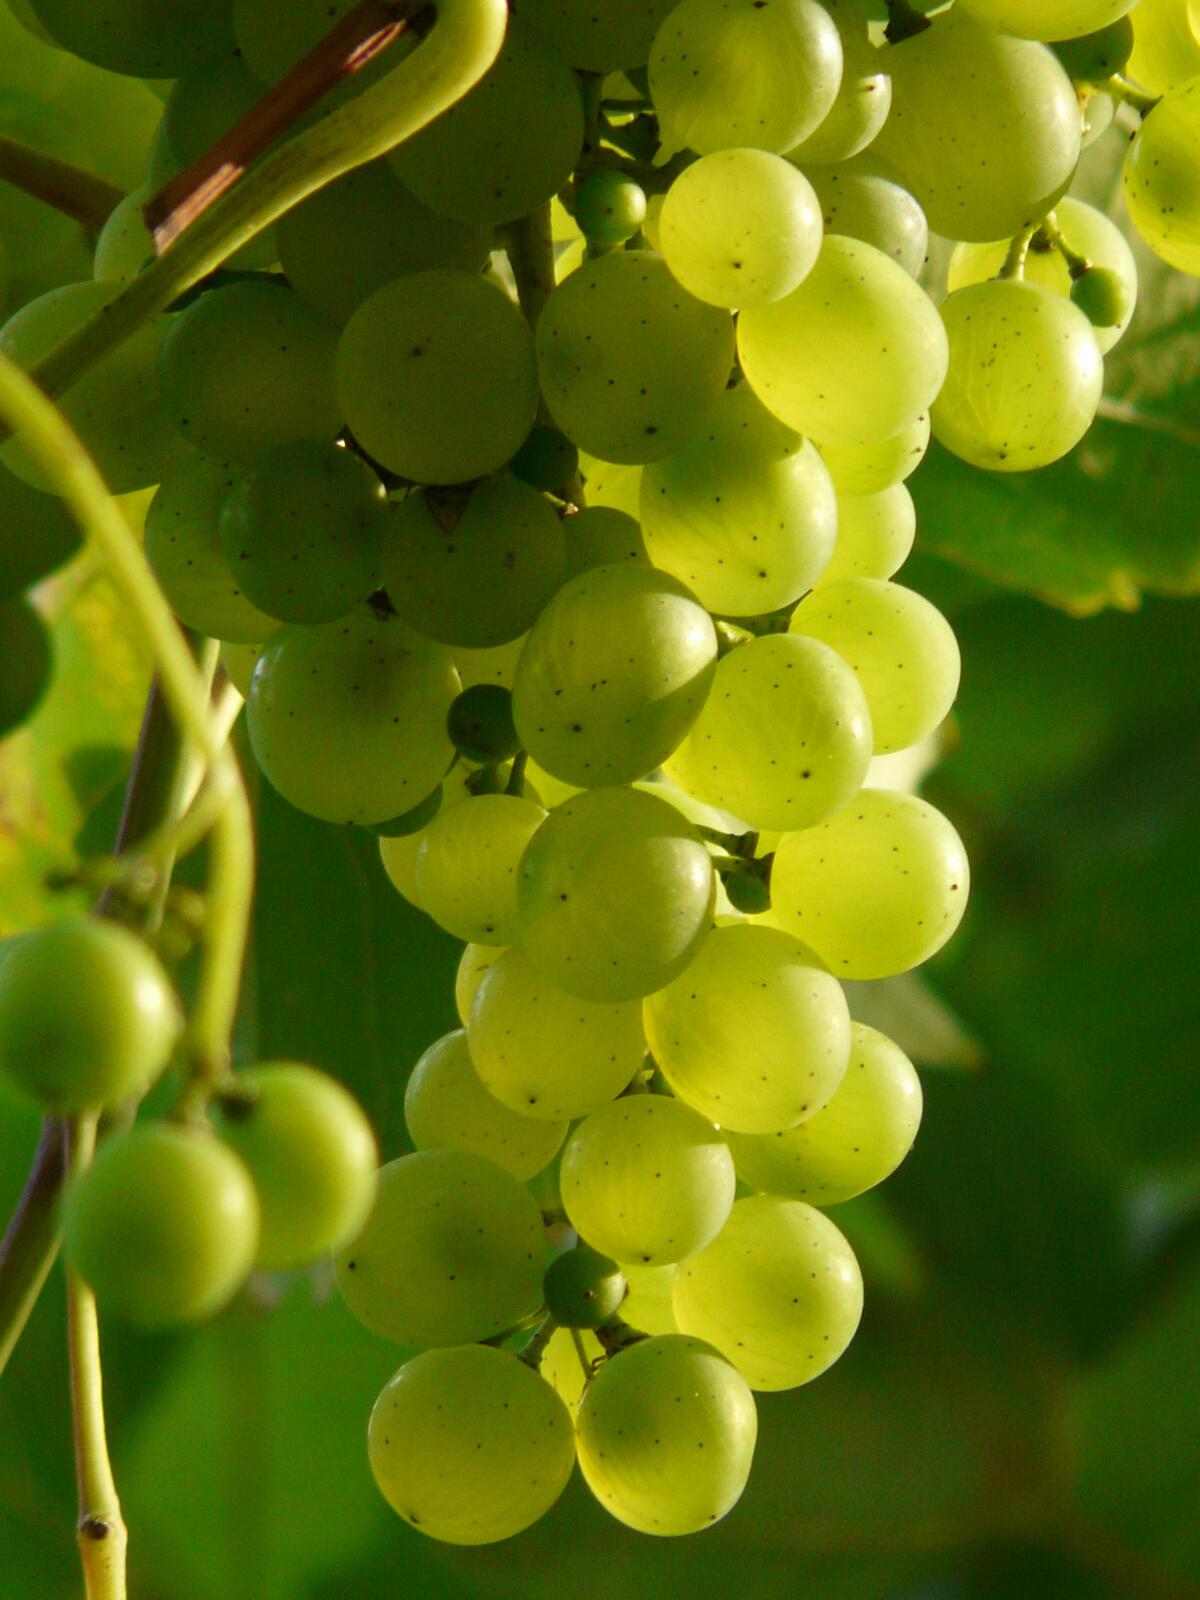 The clusters of grapes on the branch are illuminated by the morning sun